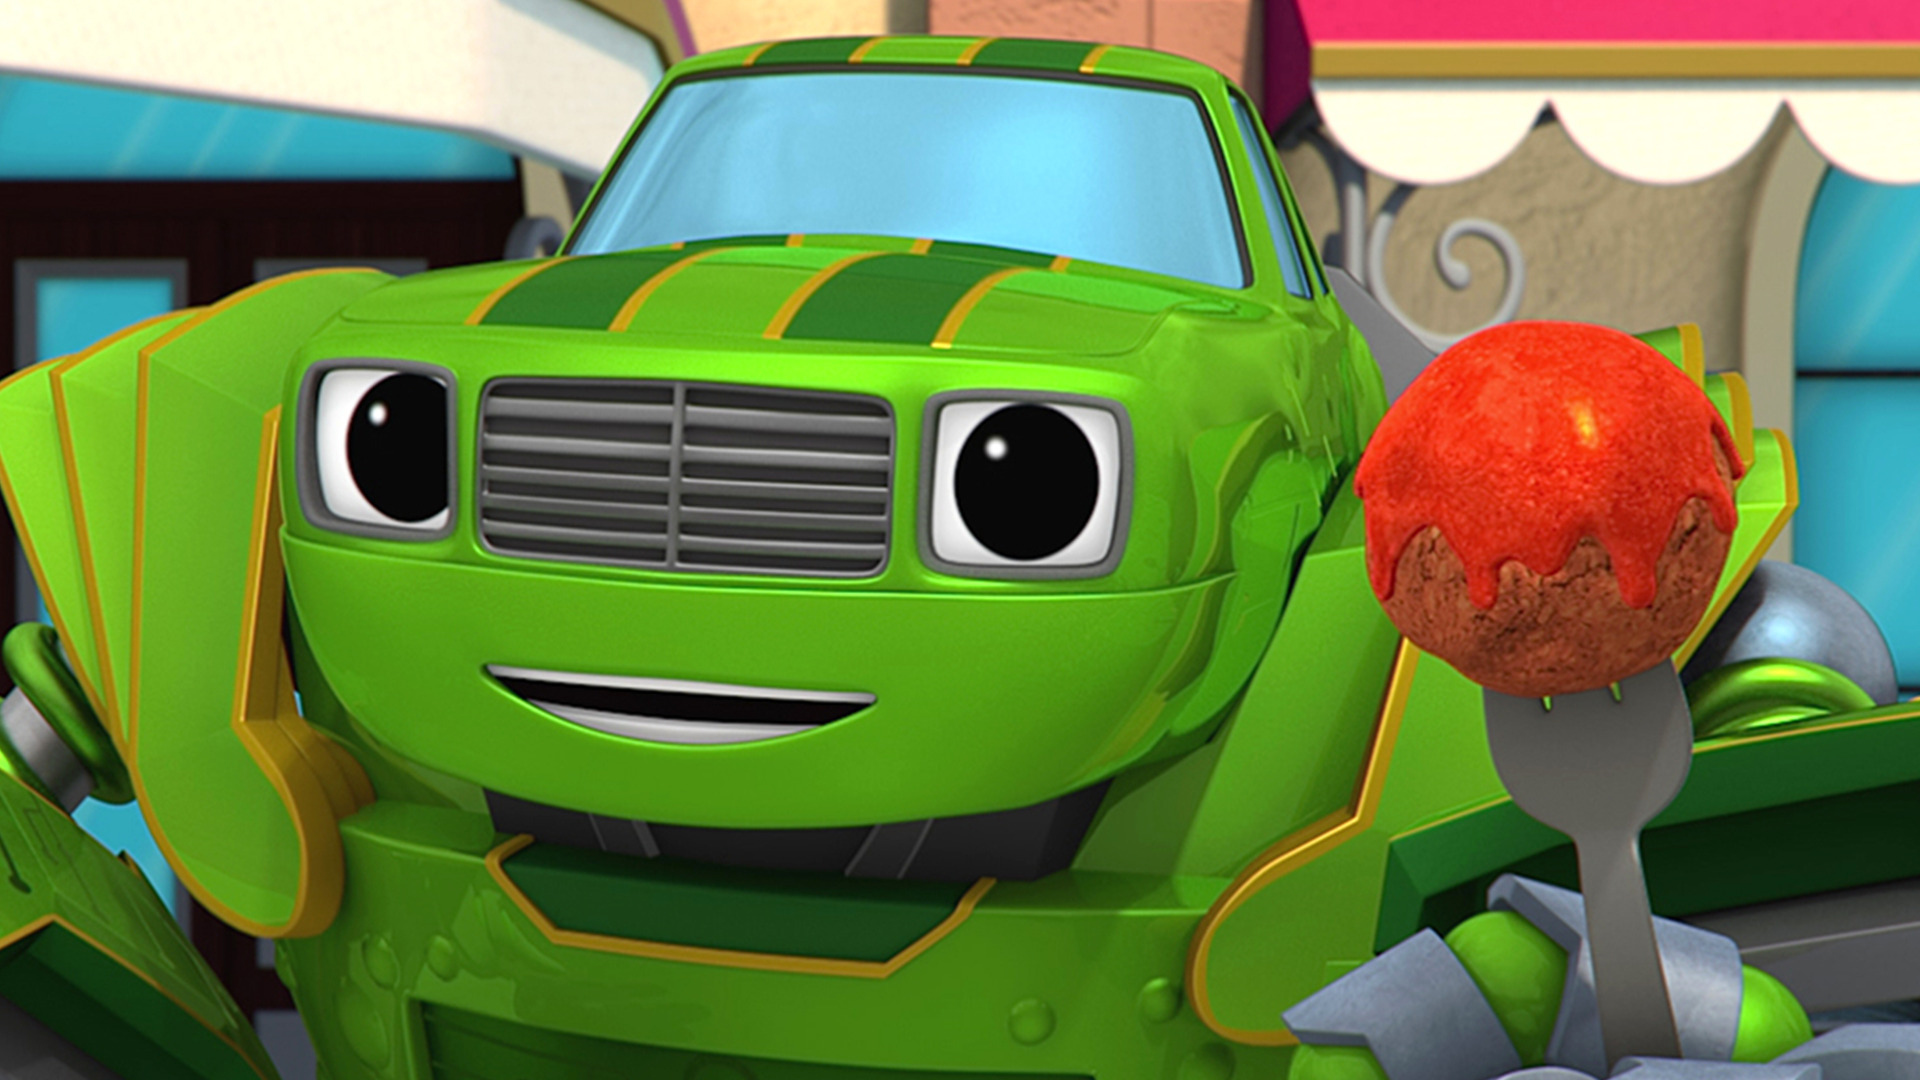 Watch Blaze and the Monster Machines Season 4 Episode 8: Meatball